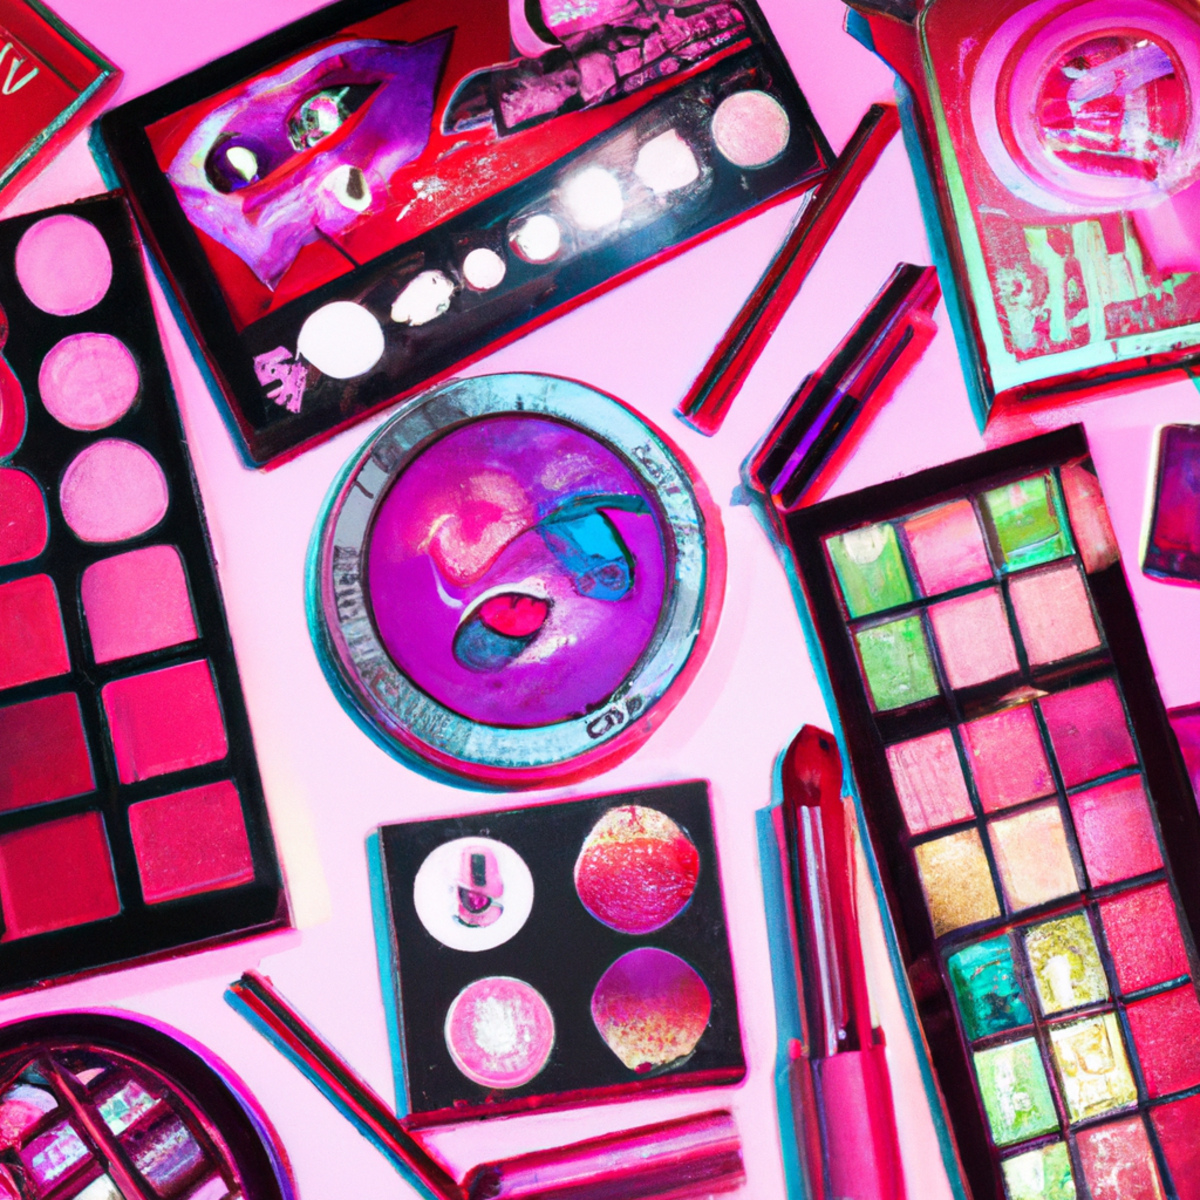 Vibrant neon makeup products arranged on reflective surface, showcasing bold colors and captivating patterns.